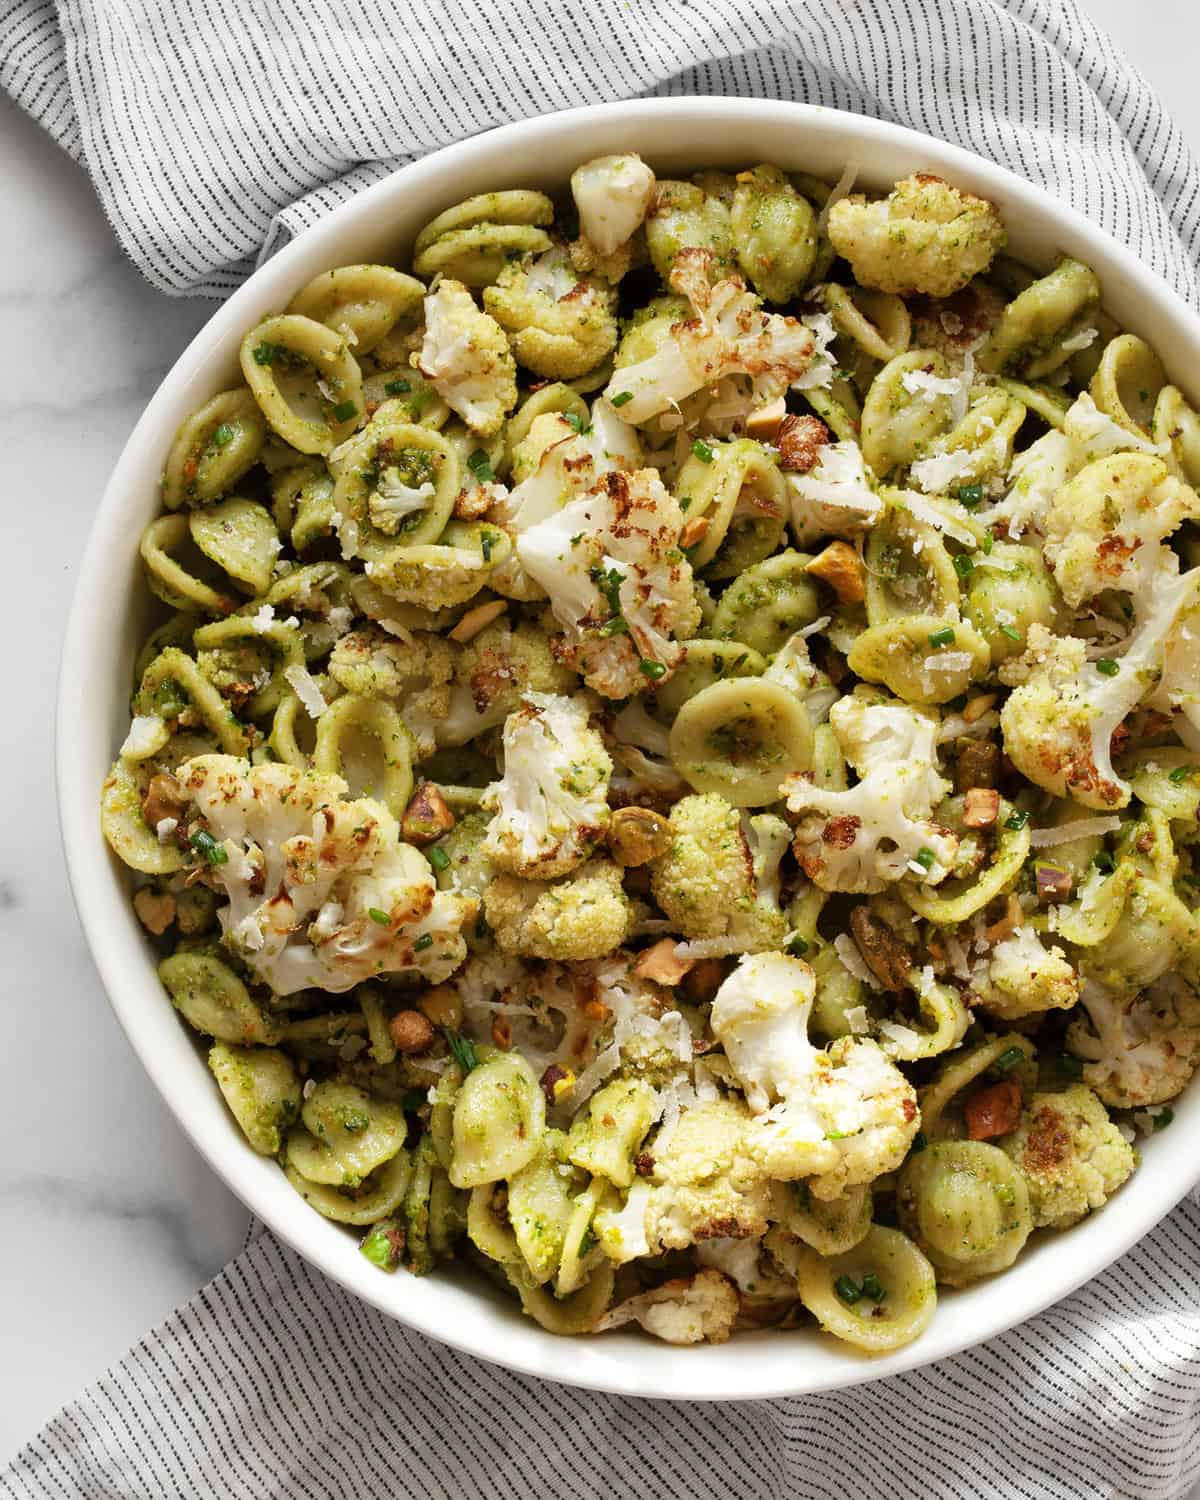 Roasted cauliflower pasta with spinach pesto in a bowl.